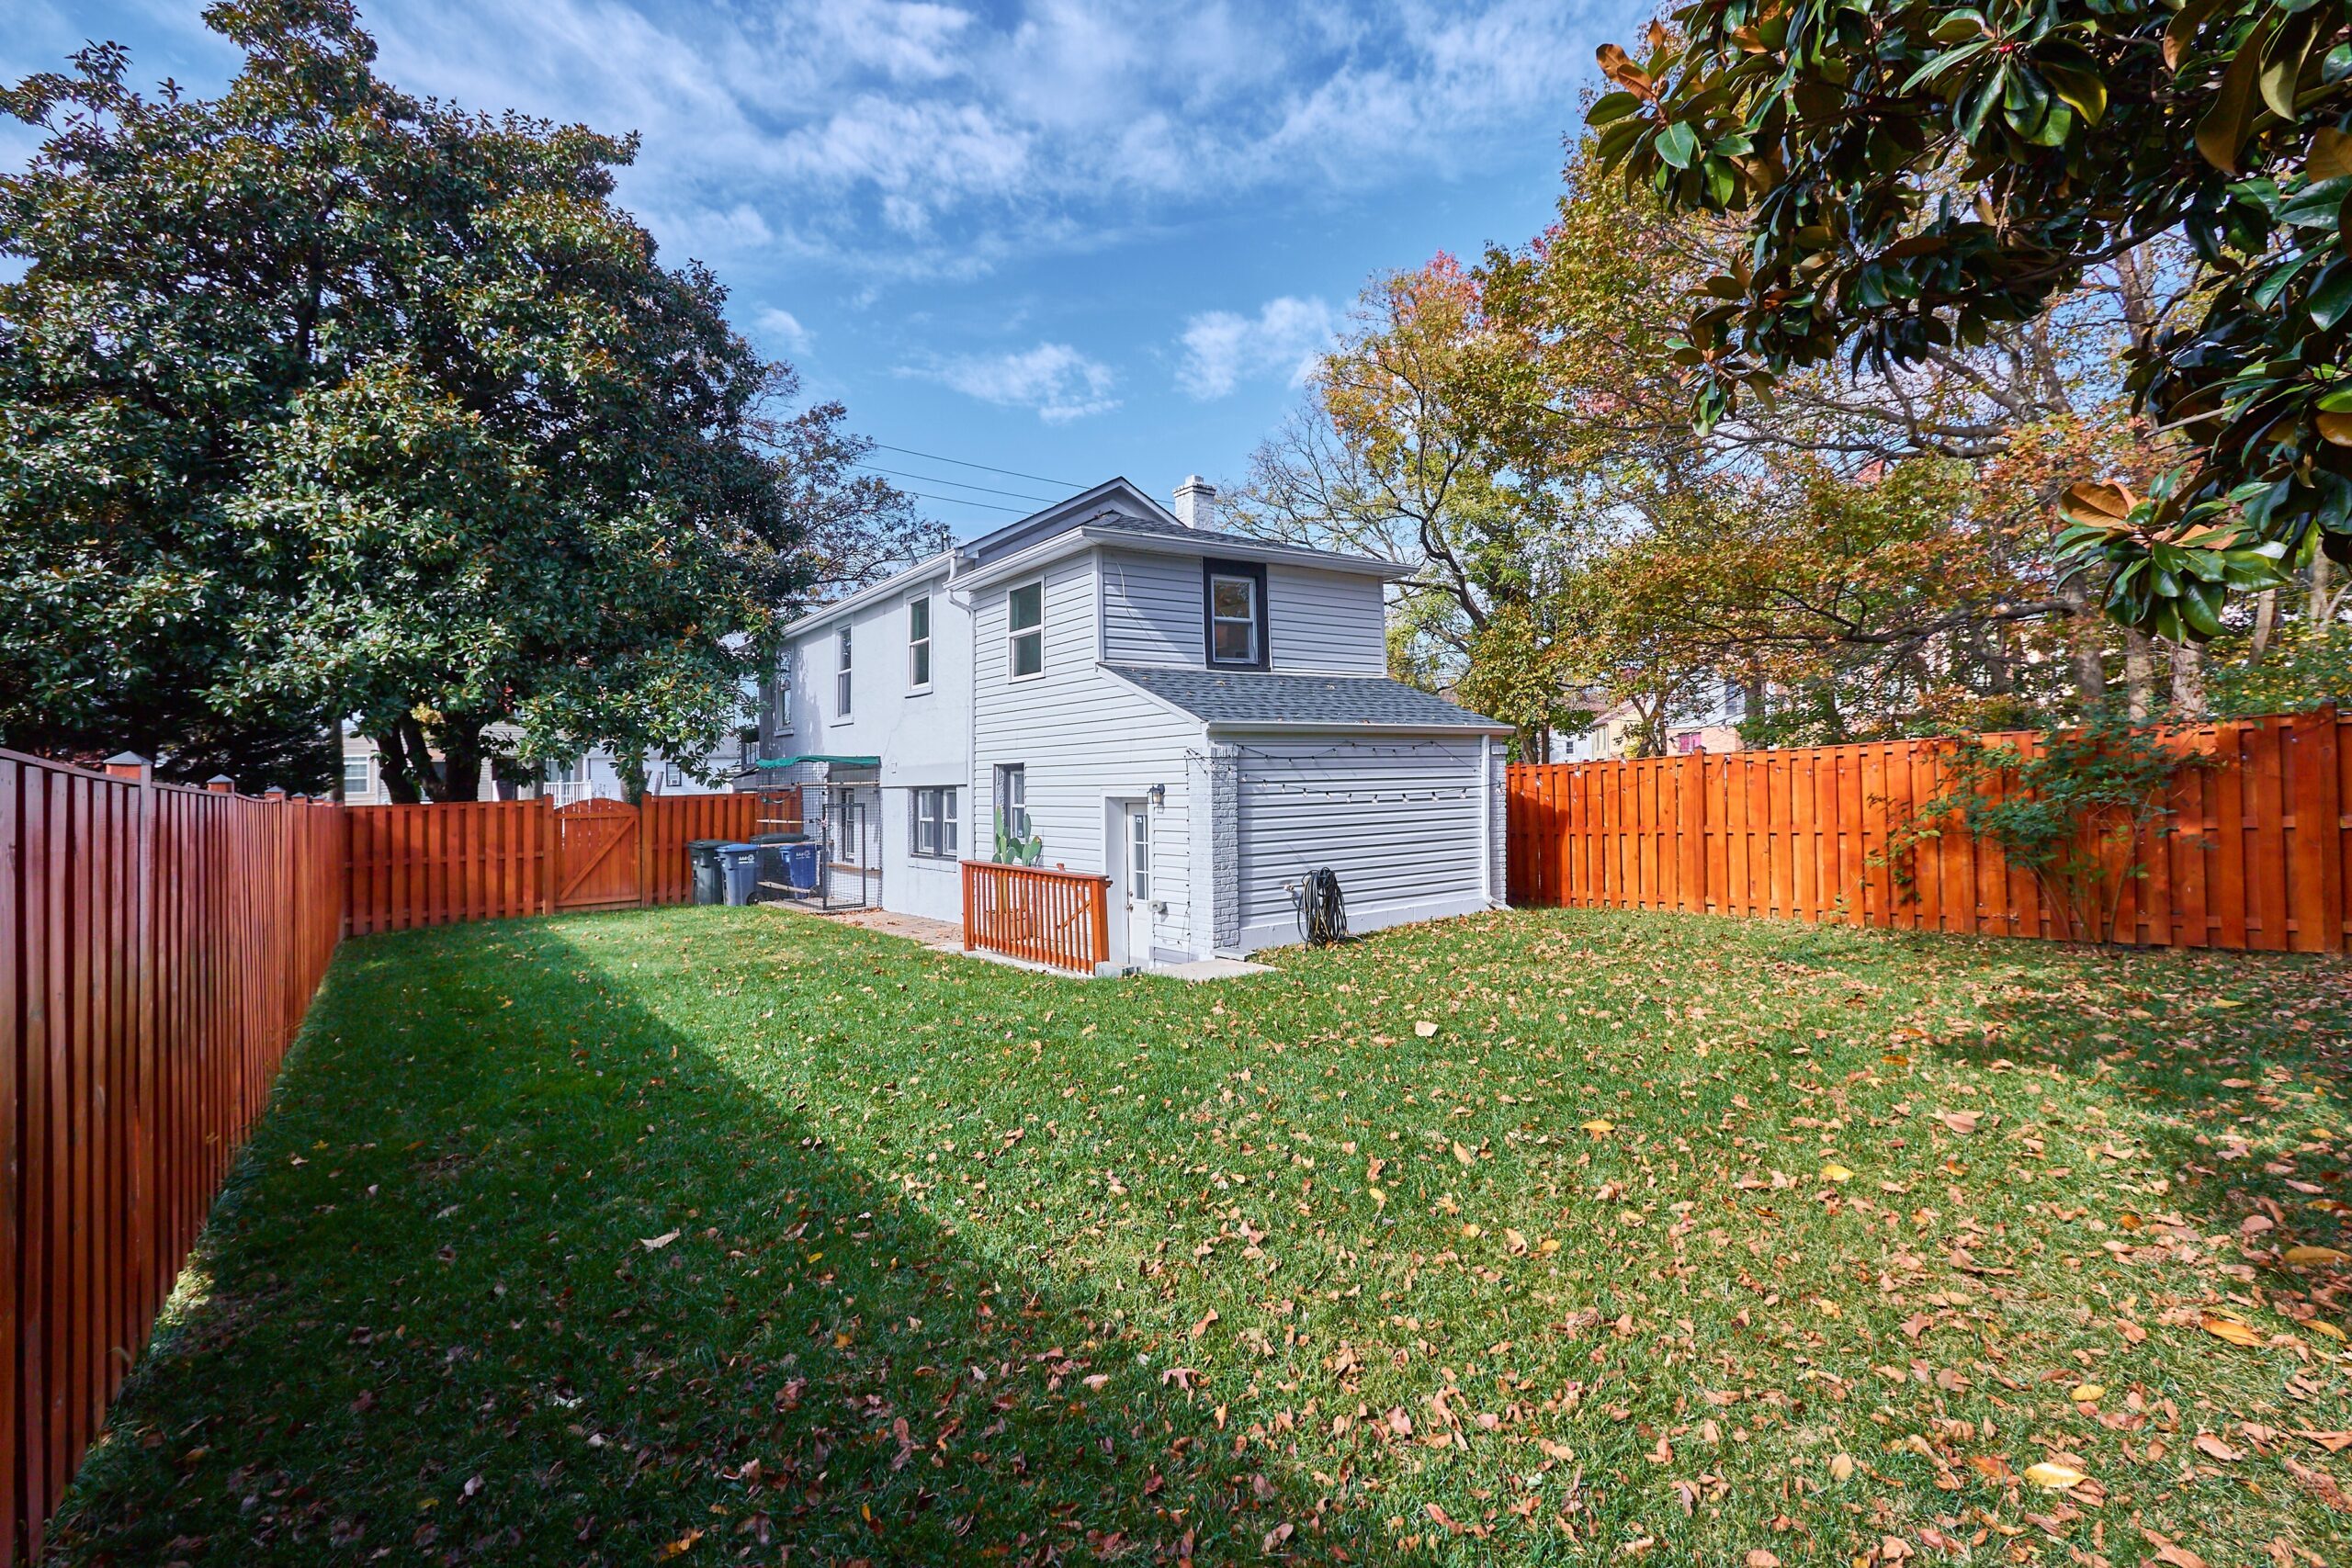 Professional exterior photo of 1219 50th St NE in Washington, DC - showing the rear of the home across a flat backyard that is fully fenced